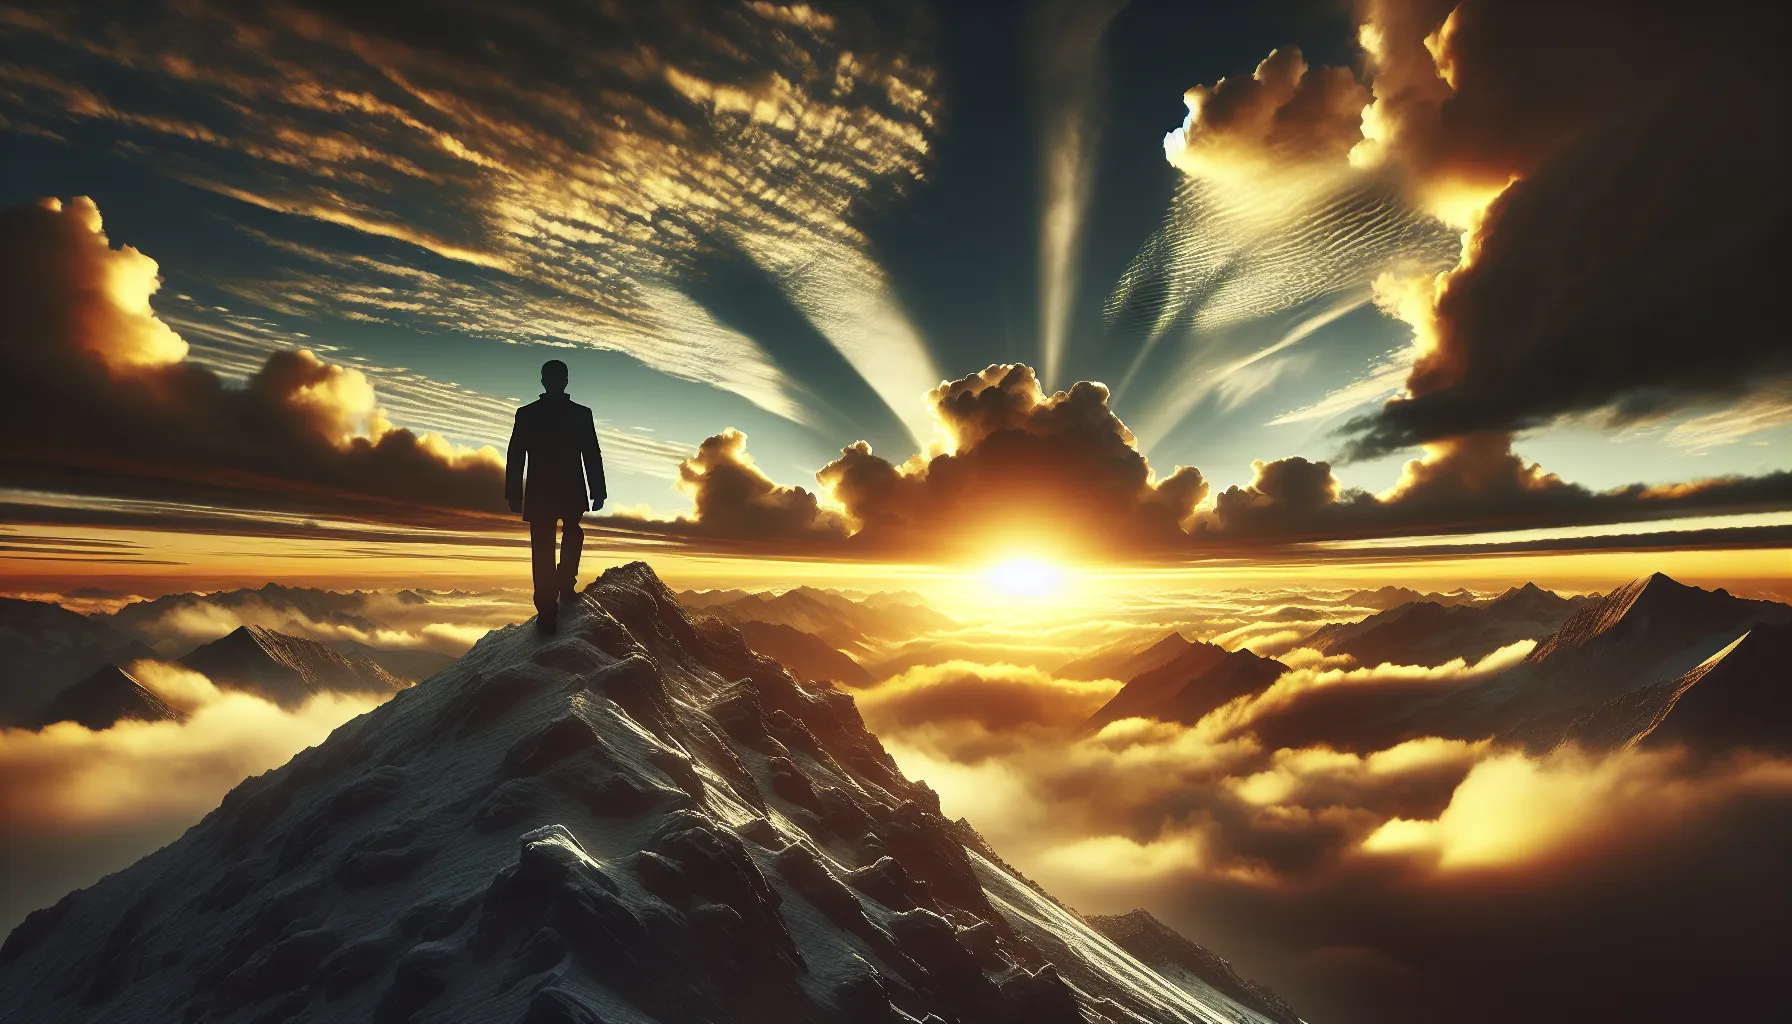 As we ascend the peaks of our individual aspirations, the horizon of possibilities stretches before us, inviting us to embark on a quest towards our most cherished dreams, lighting up the path of our shared human experience.